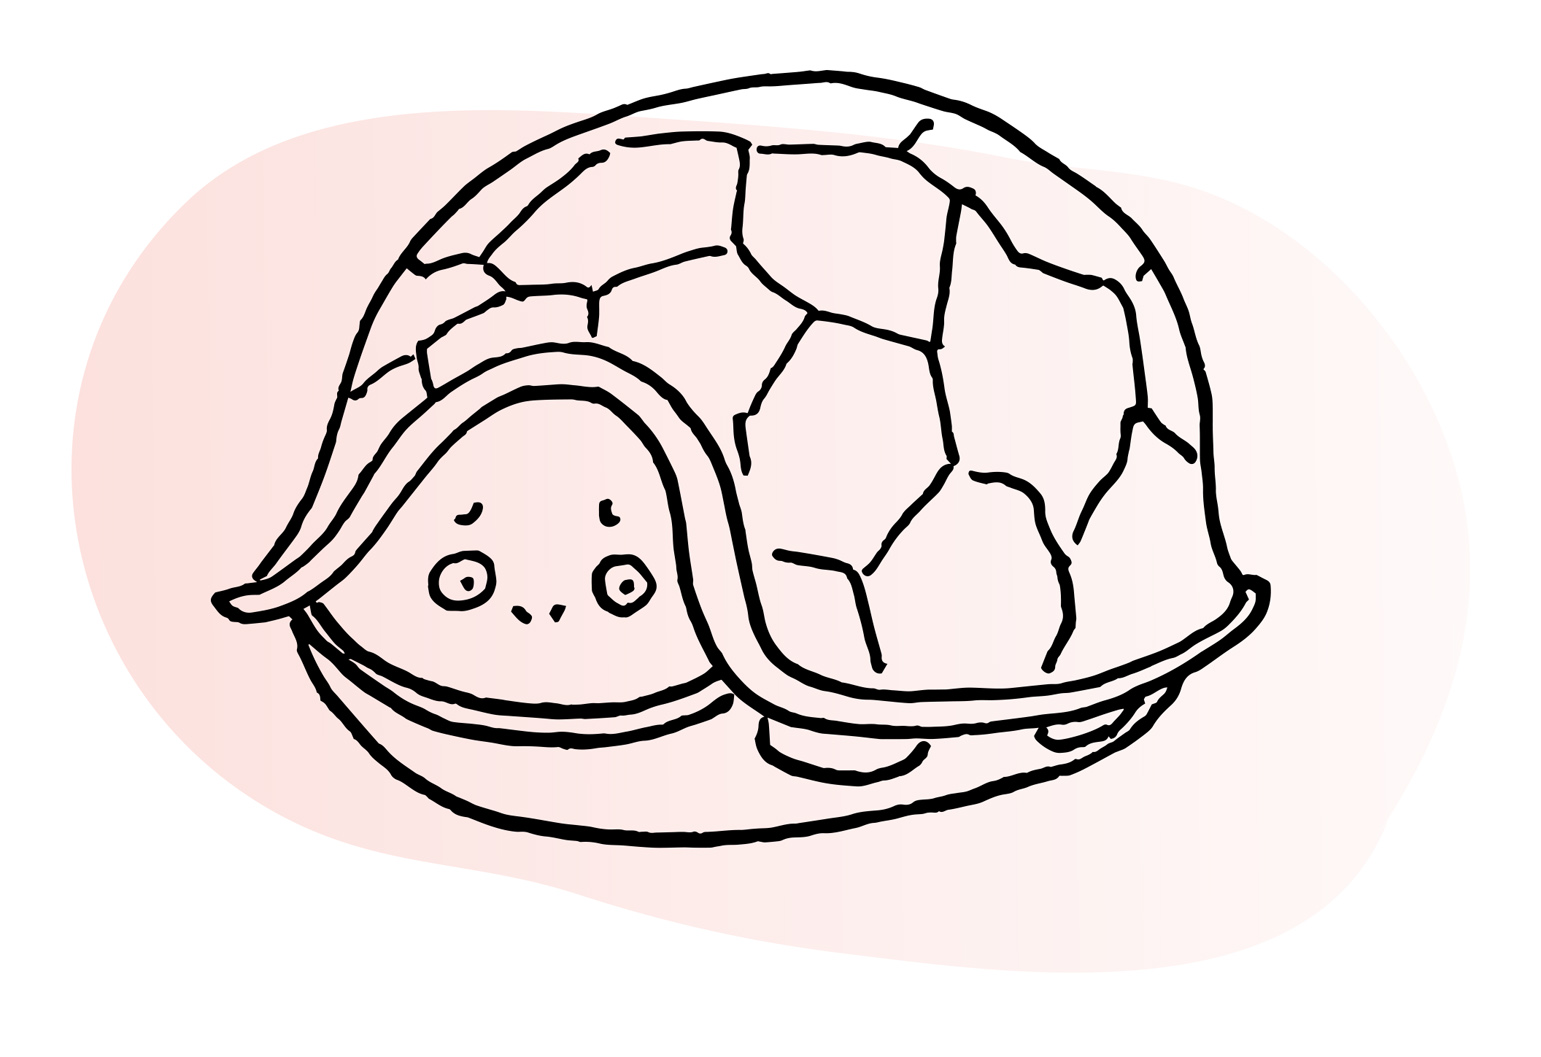 Line illustration of turtle with head and legs retracted into its shell